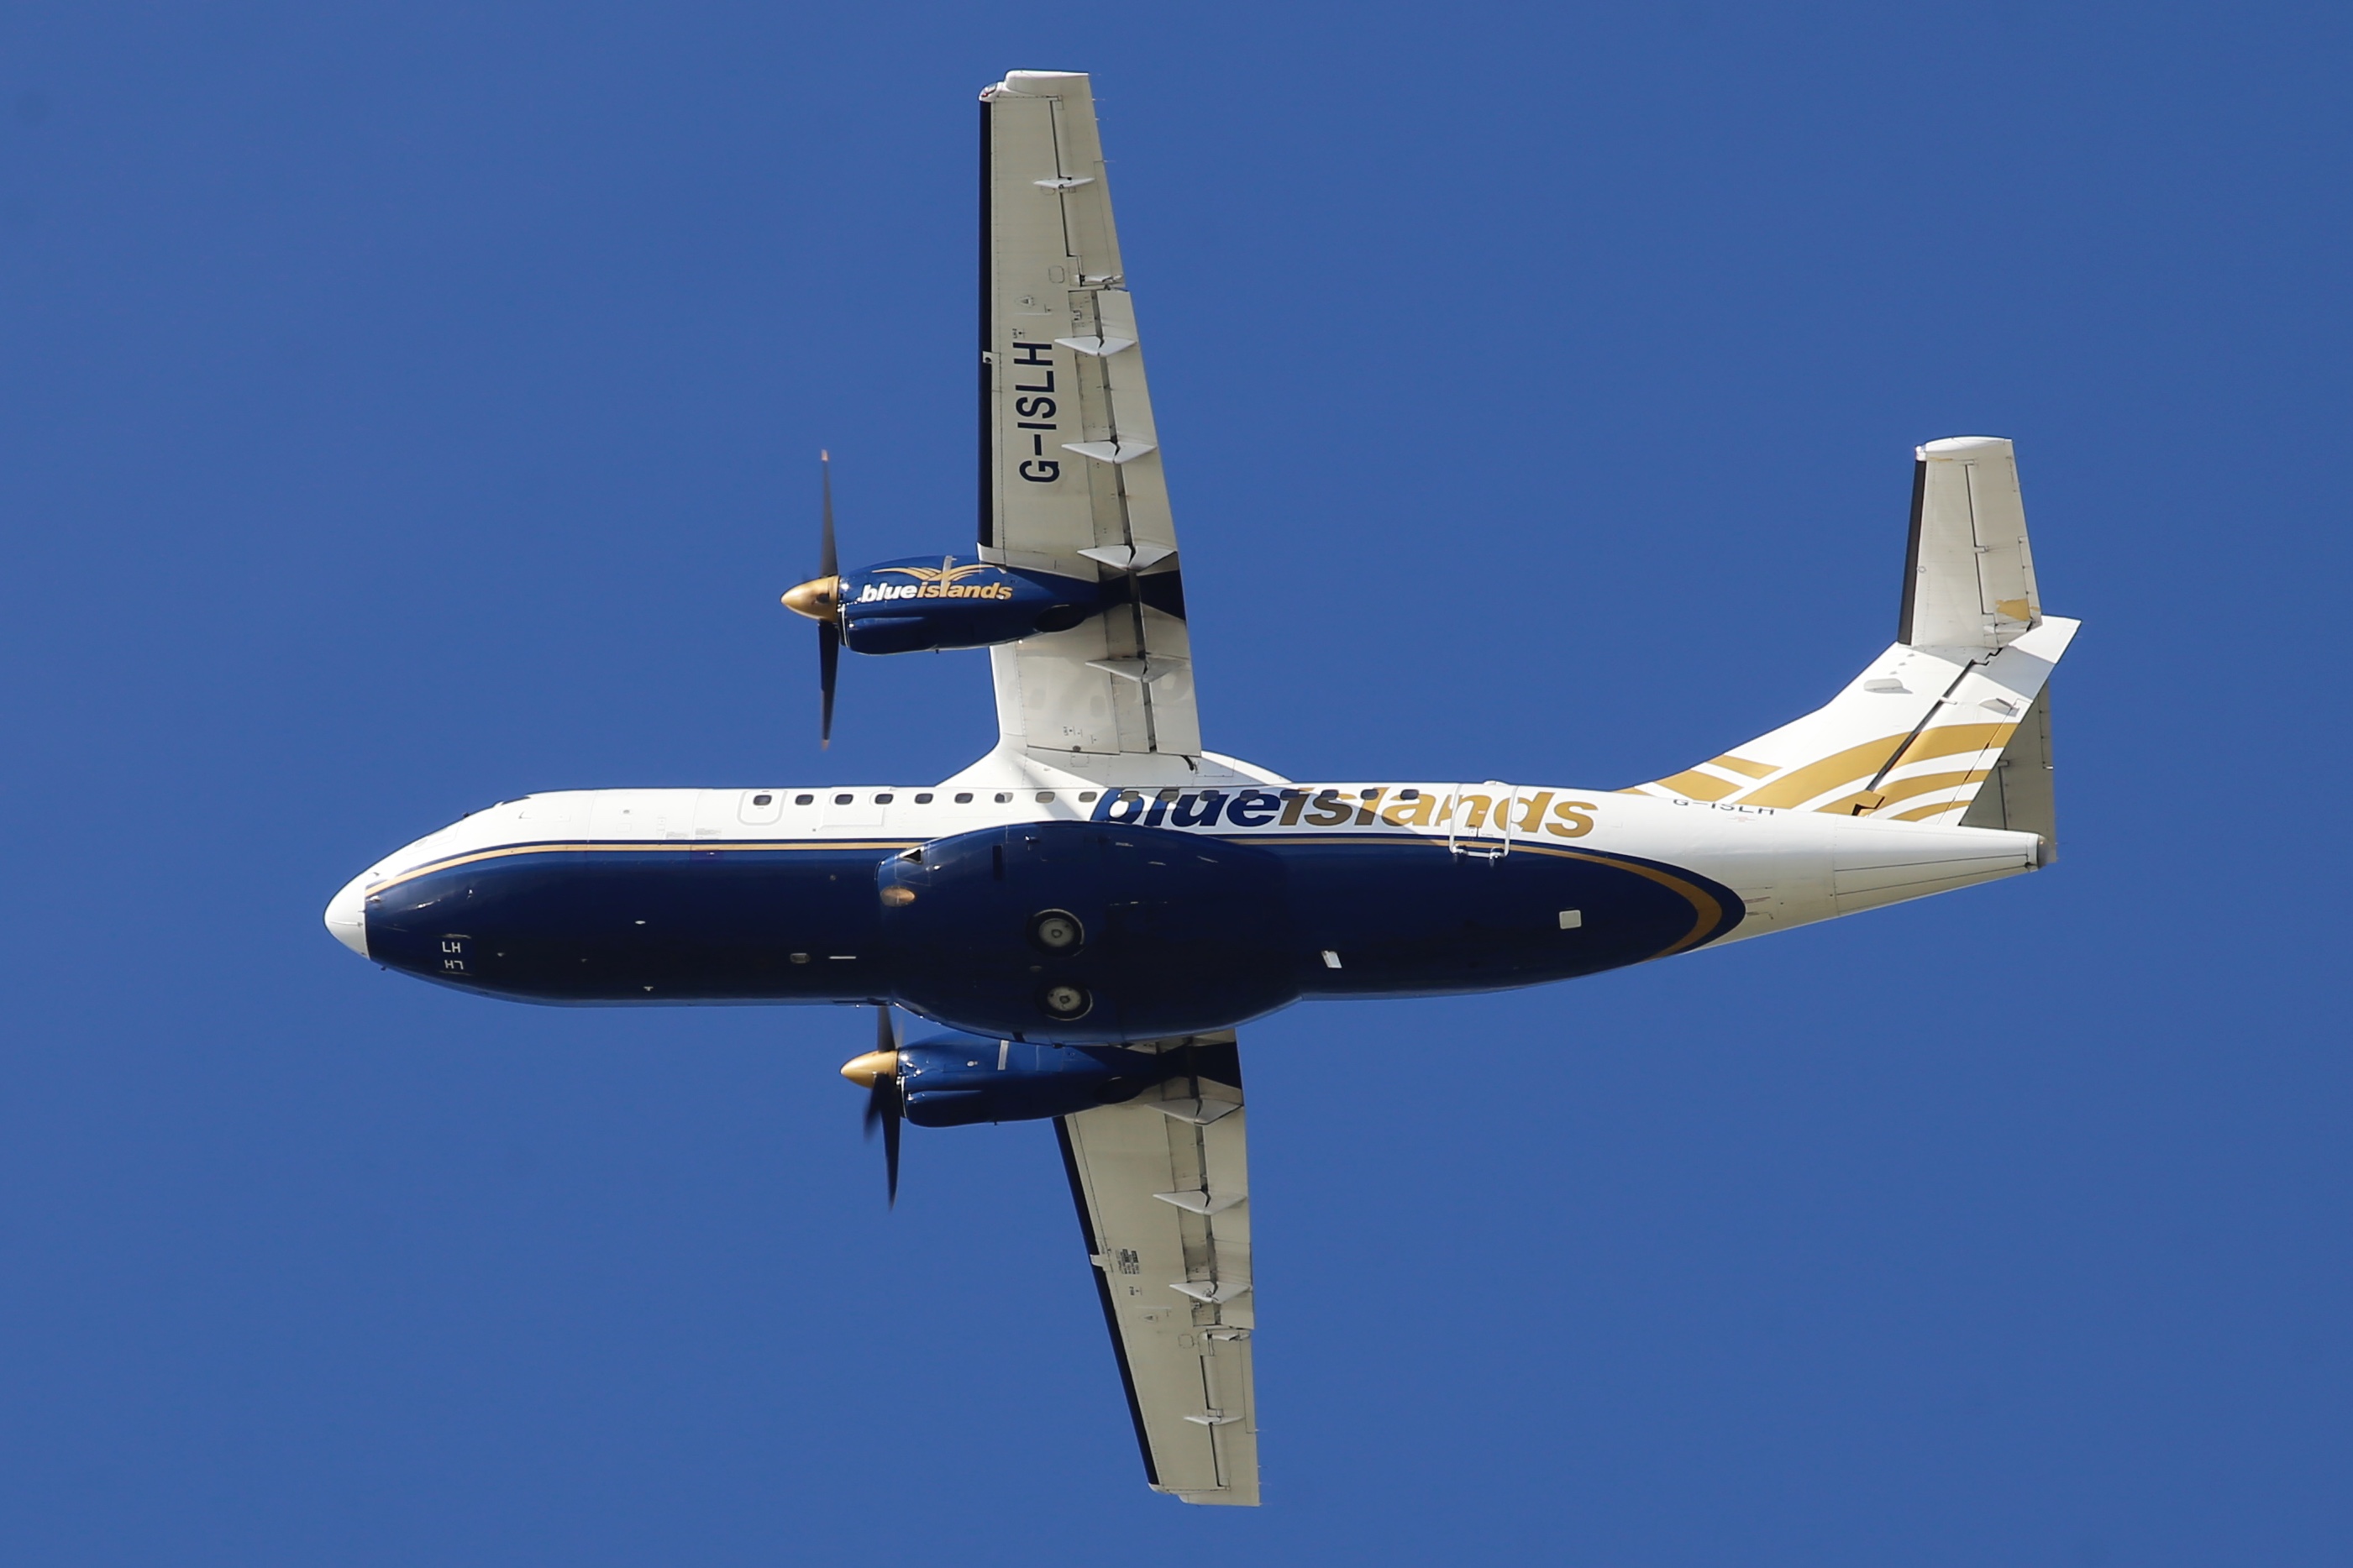 Report on the regional aircraft market - January 2021